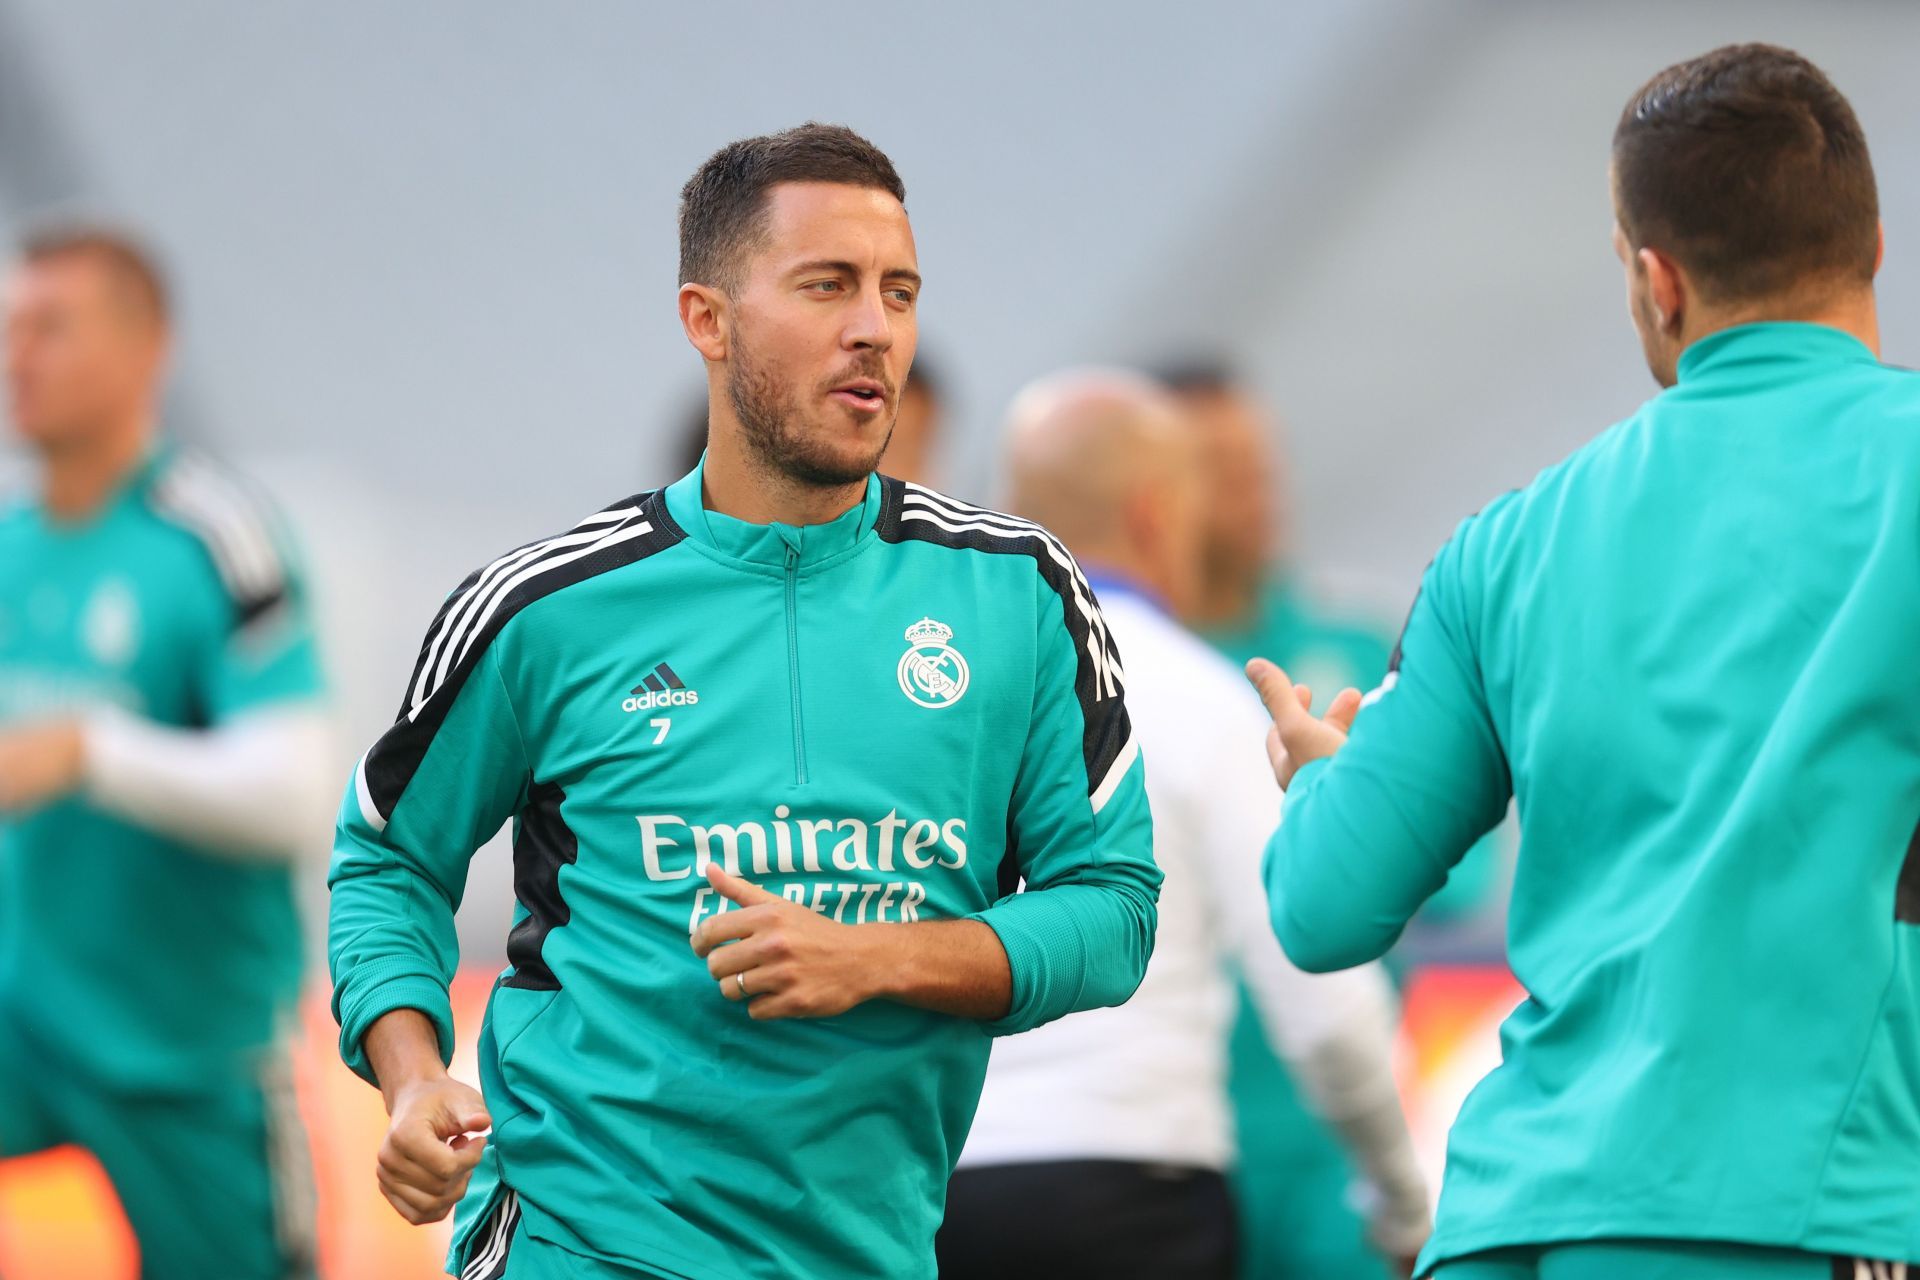 Eden Hazard is hoping to finally live up to expectations at Real Madrid next season.